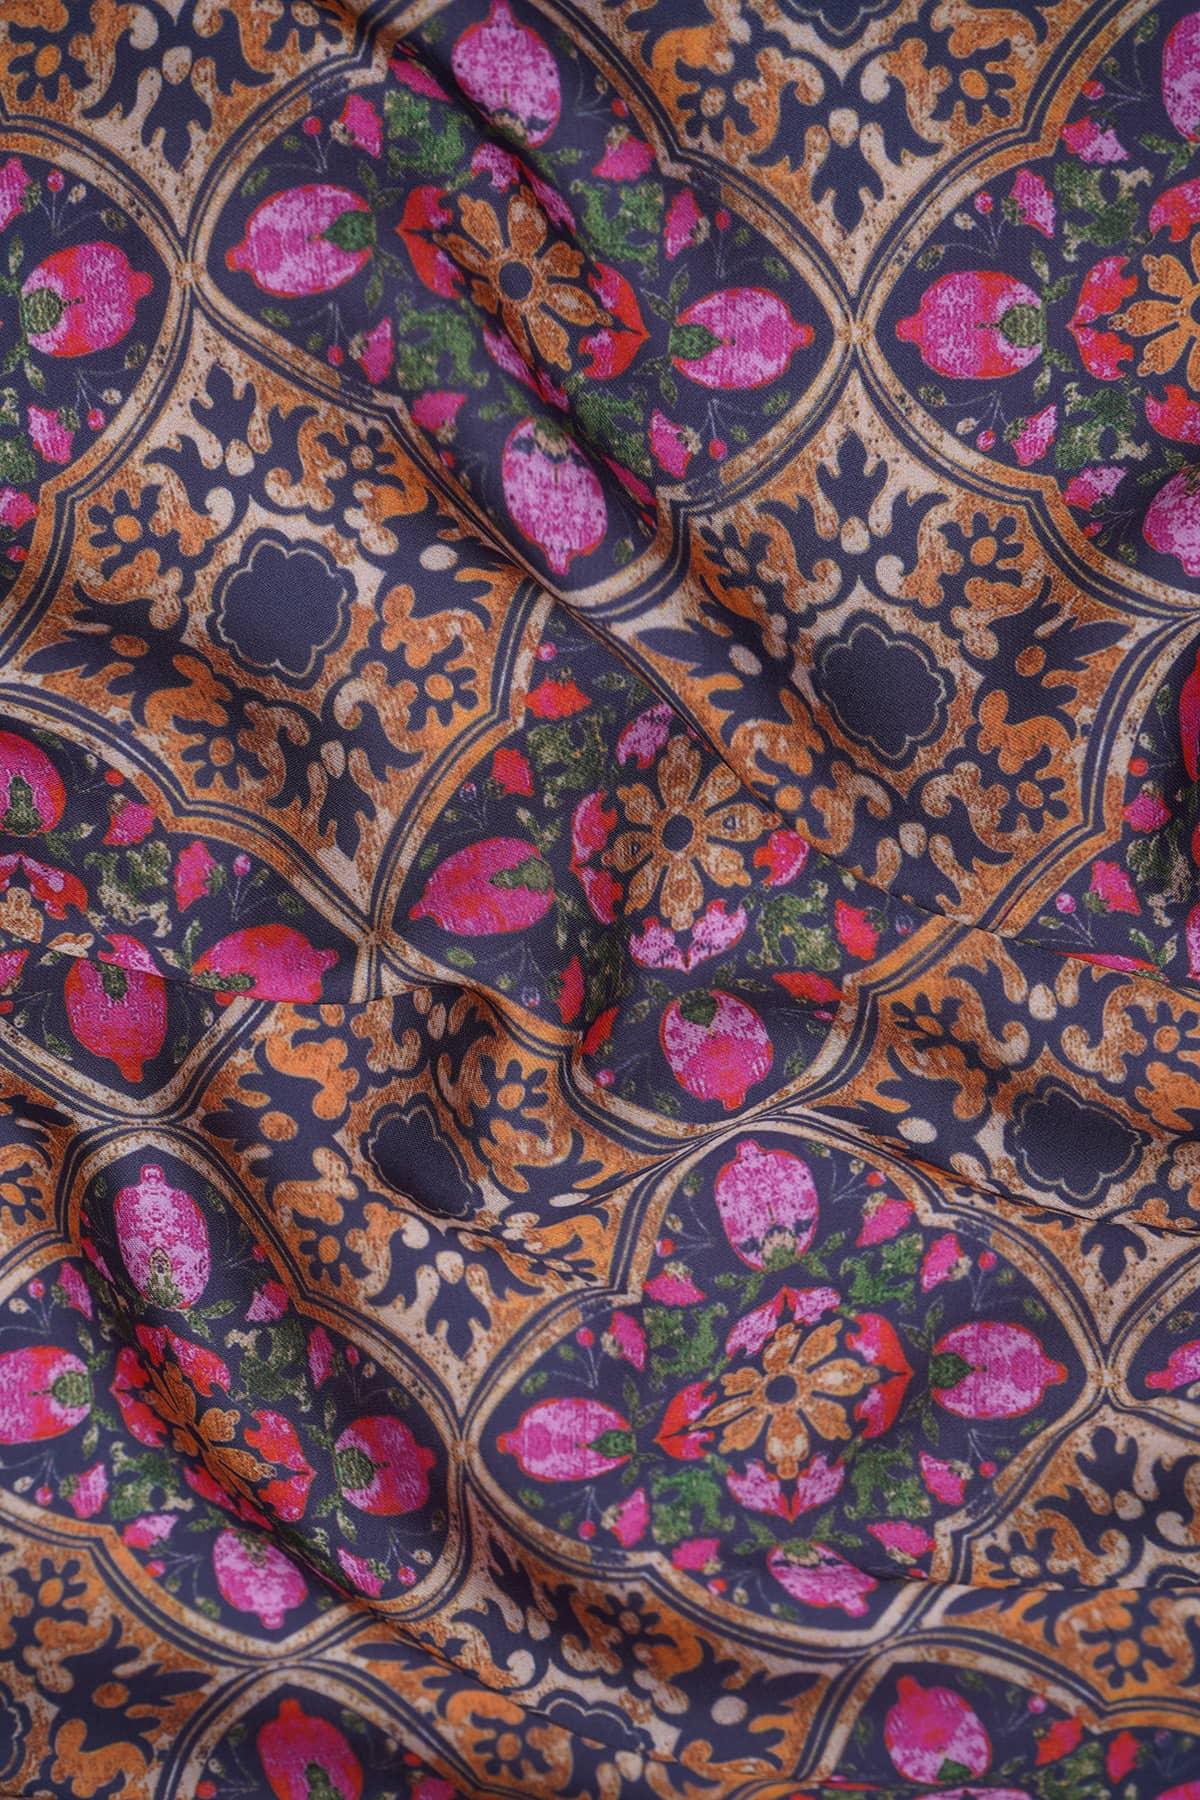 Pink and Mustard Floral Pattern Digitally Printed on Charmie Satin - saraaha.com - accesories, Casual, Charmie Satin, Digital Print, dresses and more, Formal, gowns, home decor, indo western, kurtas, sarees, Satin, Shirts, skirts, Suits, tops, trimmings